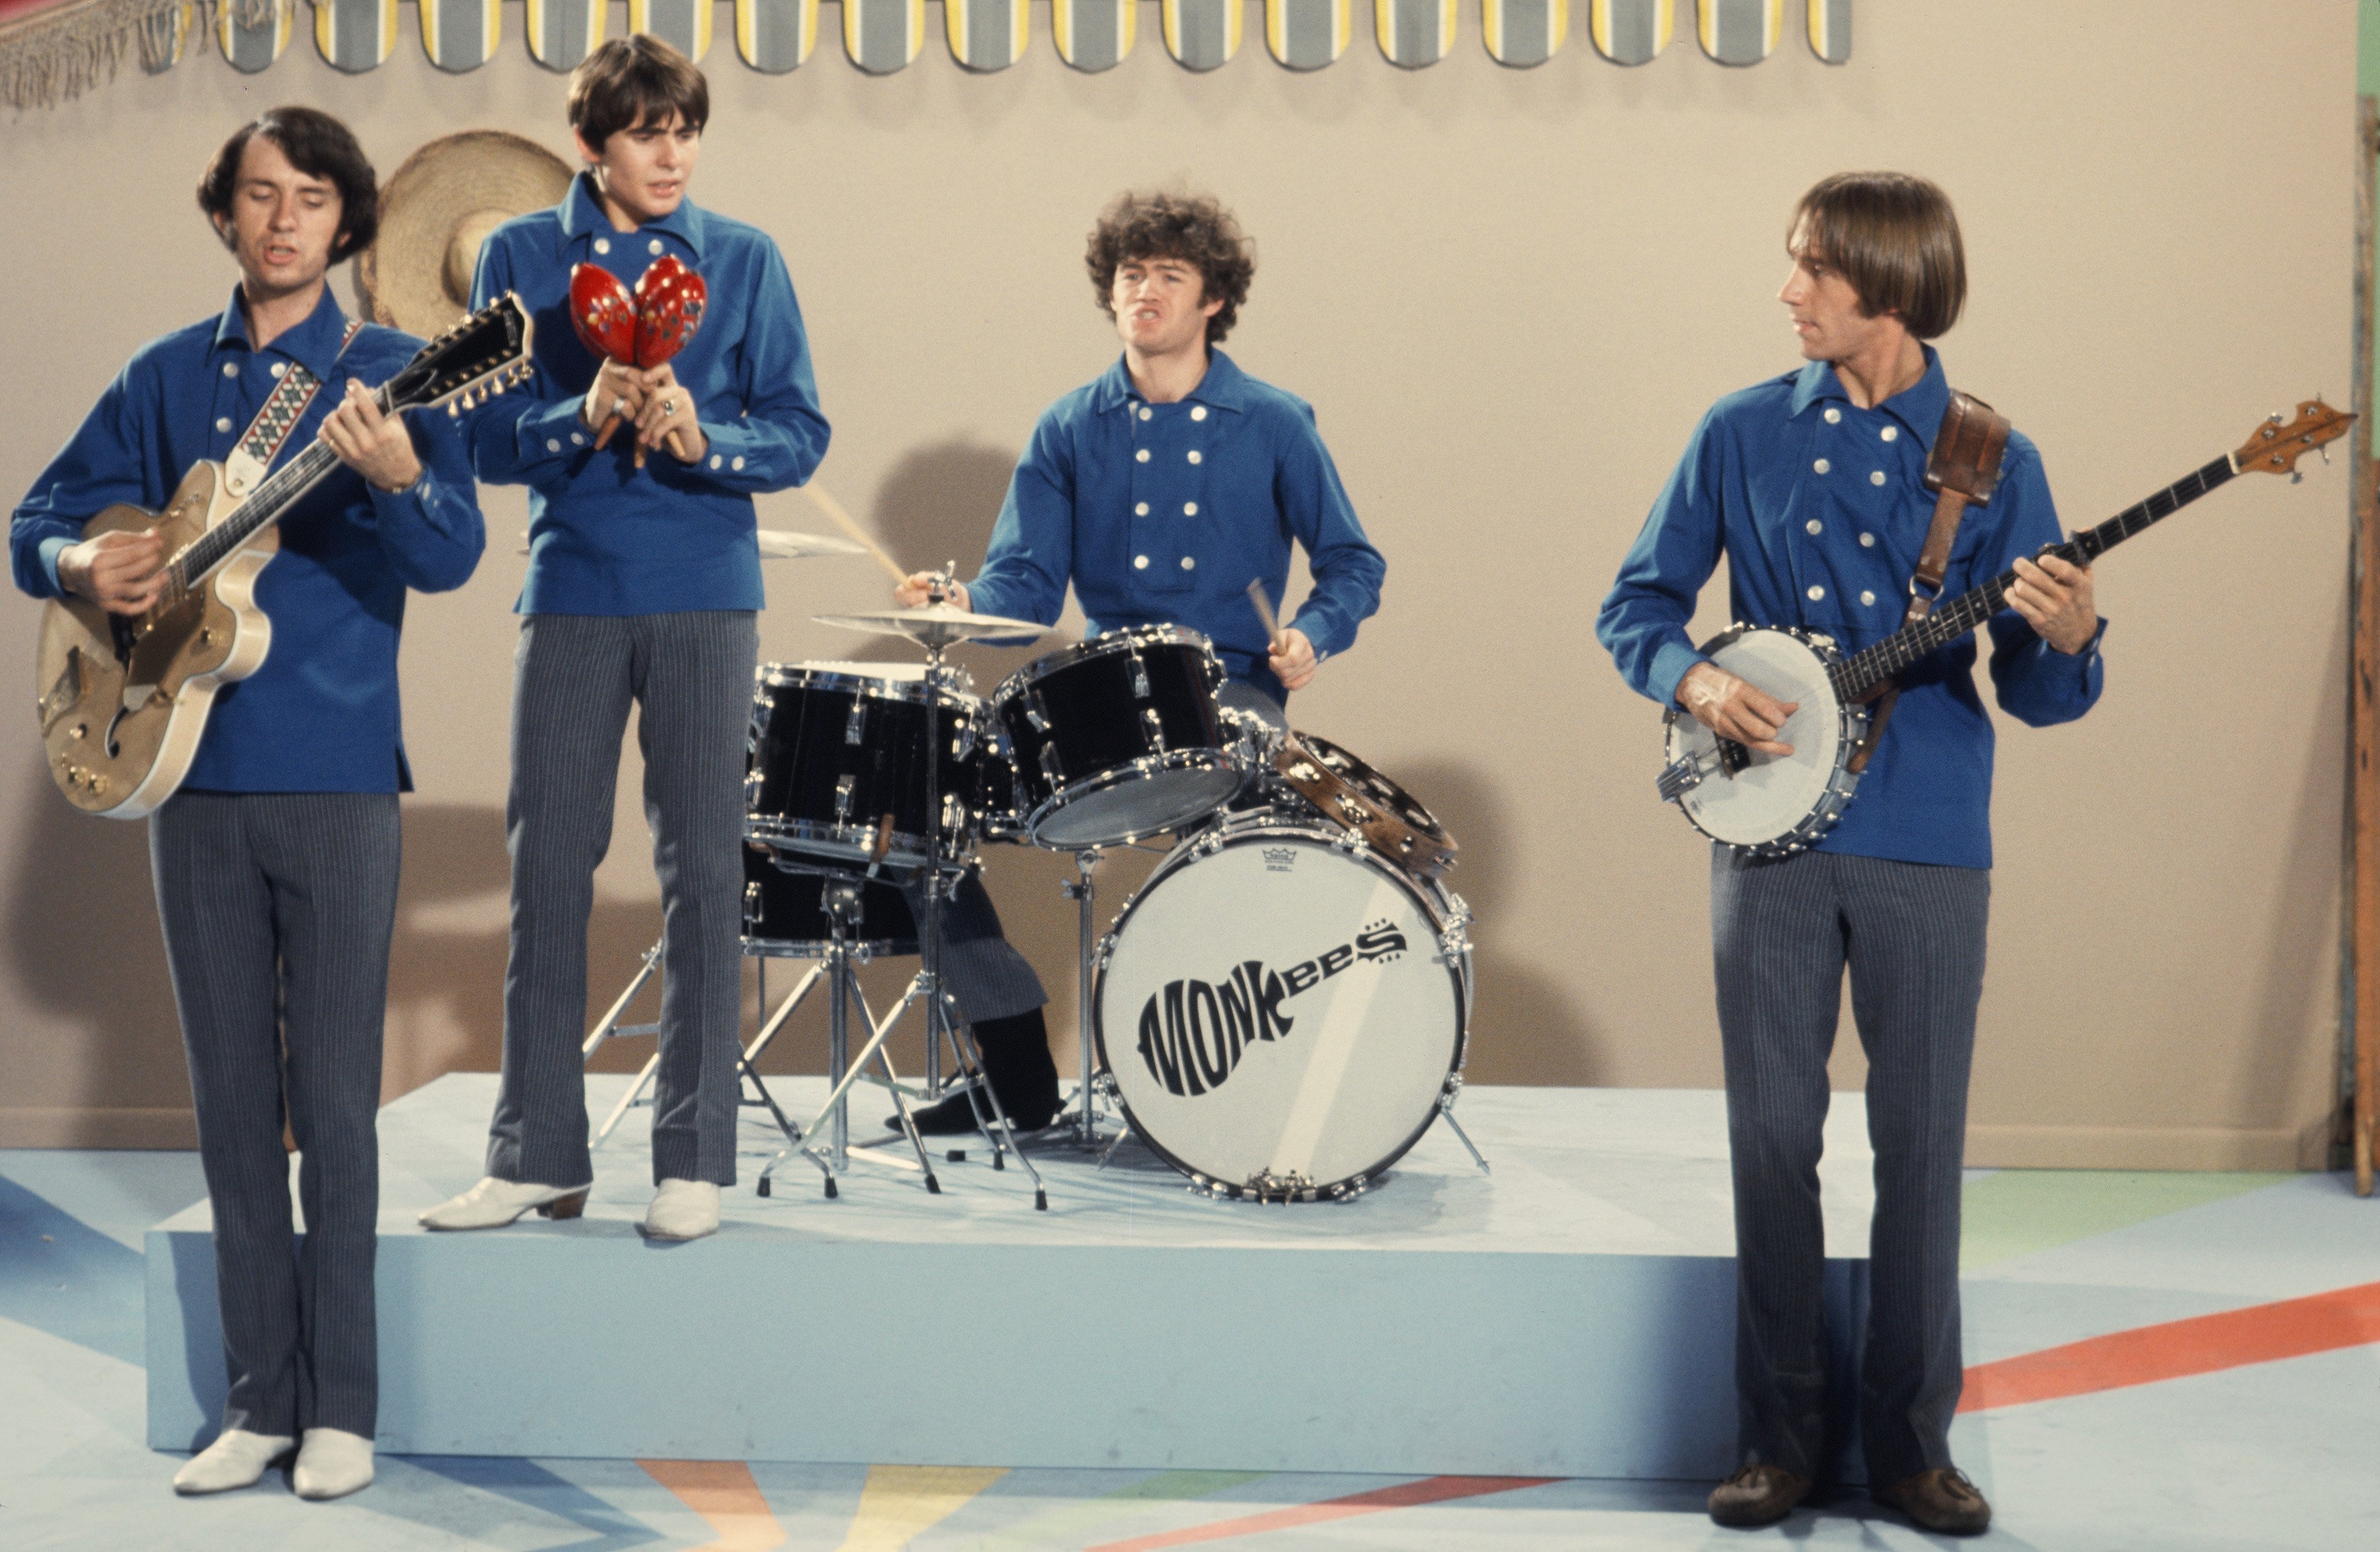 The Monkees’ Mike Nesmith, Davy Jones, Micky Dolenz, and Peter Tork wearing blue